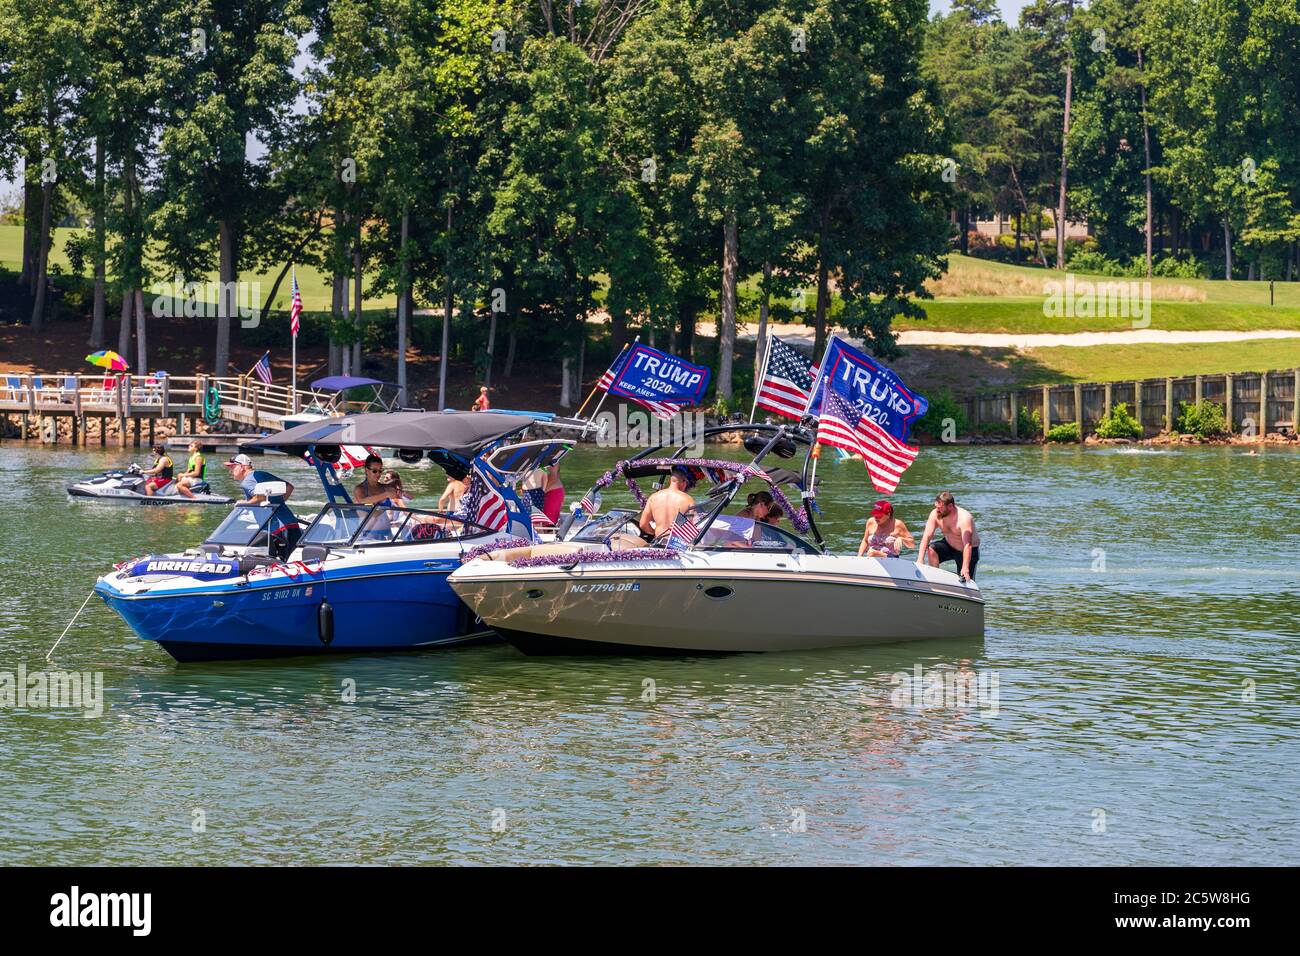 Mooresville, NC, USA - July 4, 2020: Luxury Boats flying Trump 2020 flags for President Donald Trump on Lake Norman near the Trump National Golf Club Stock Photo